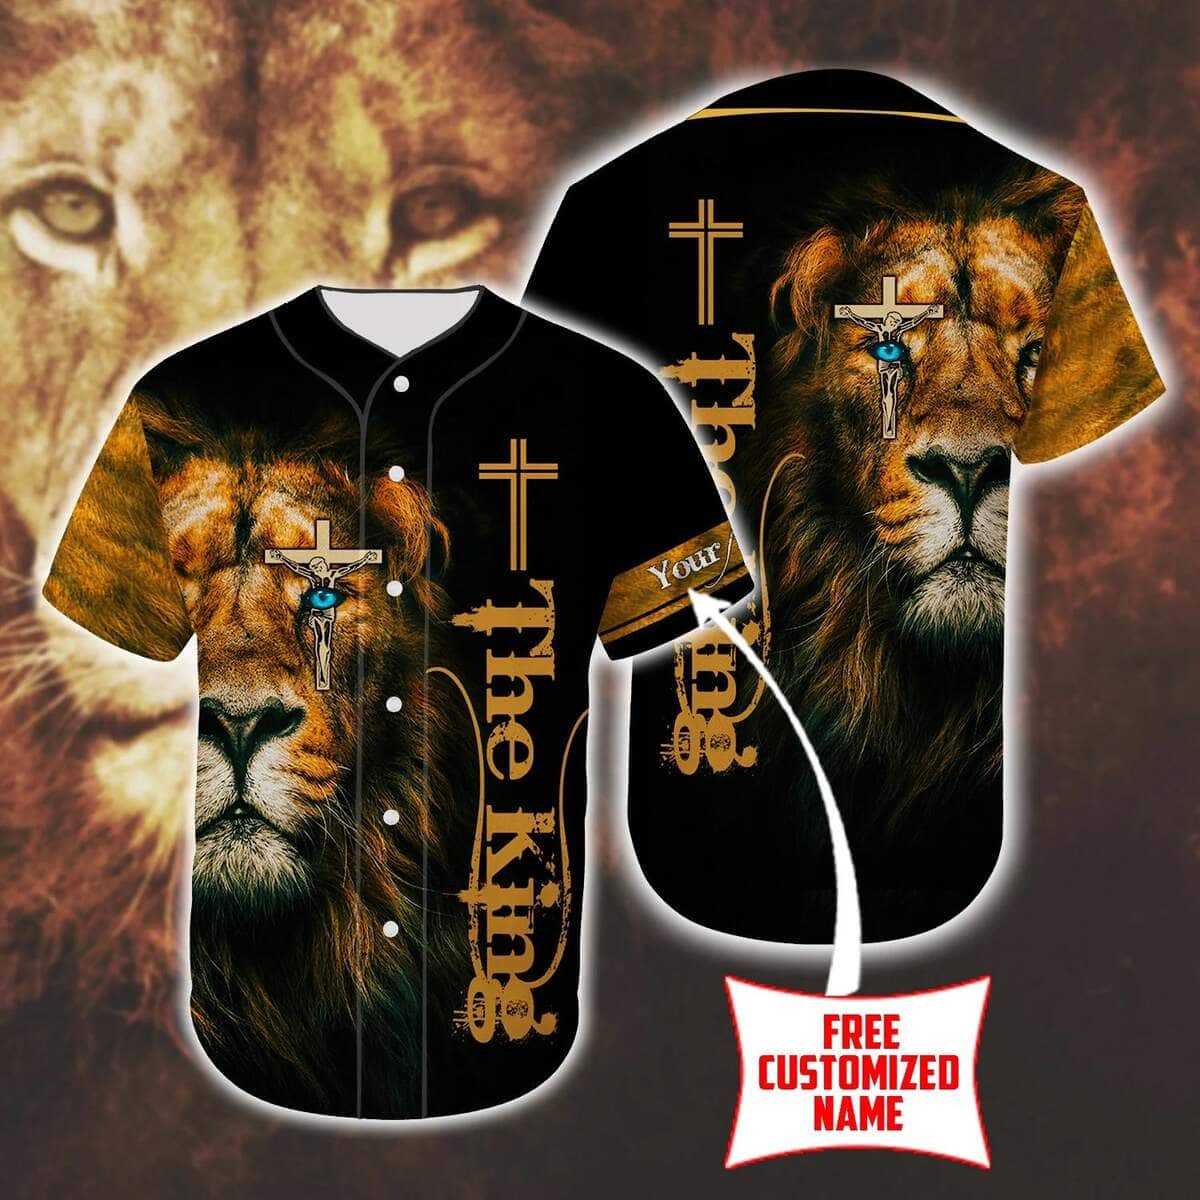 Cross Lion The King Customize Personalized Christian Religious Baseball Jersey